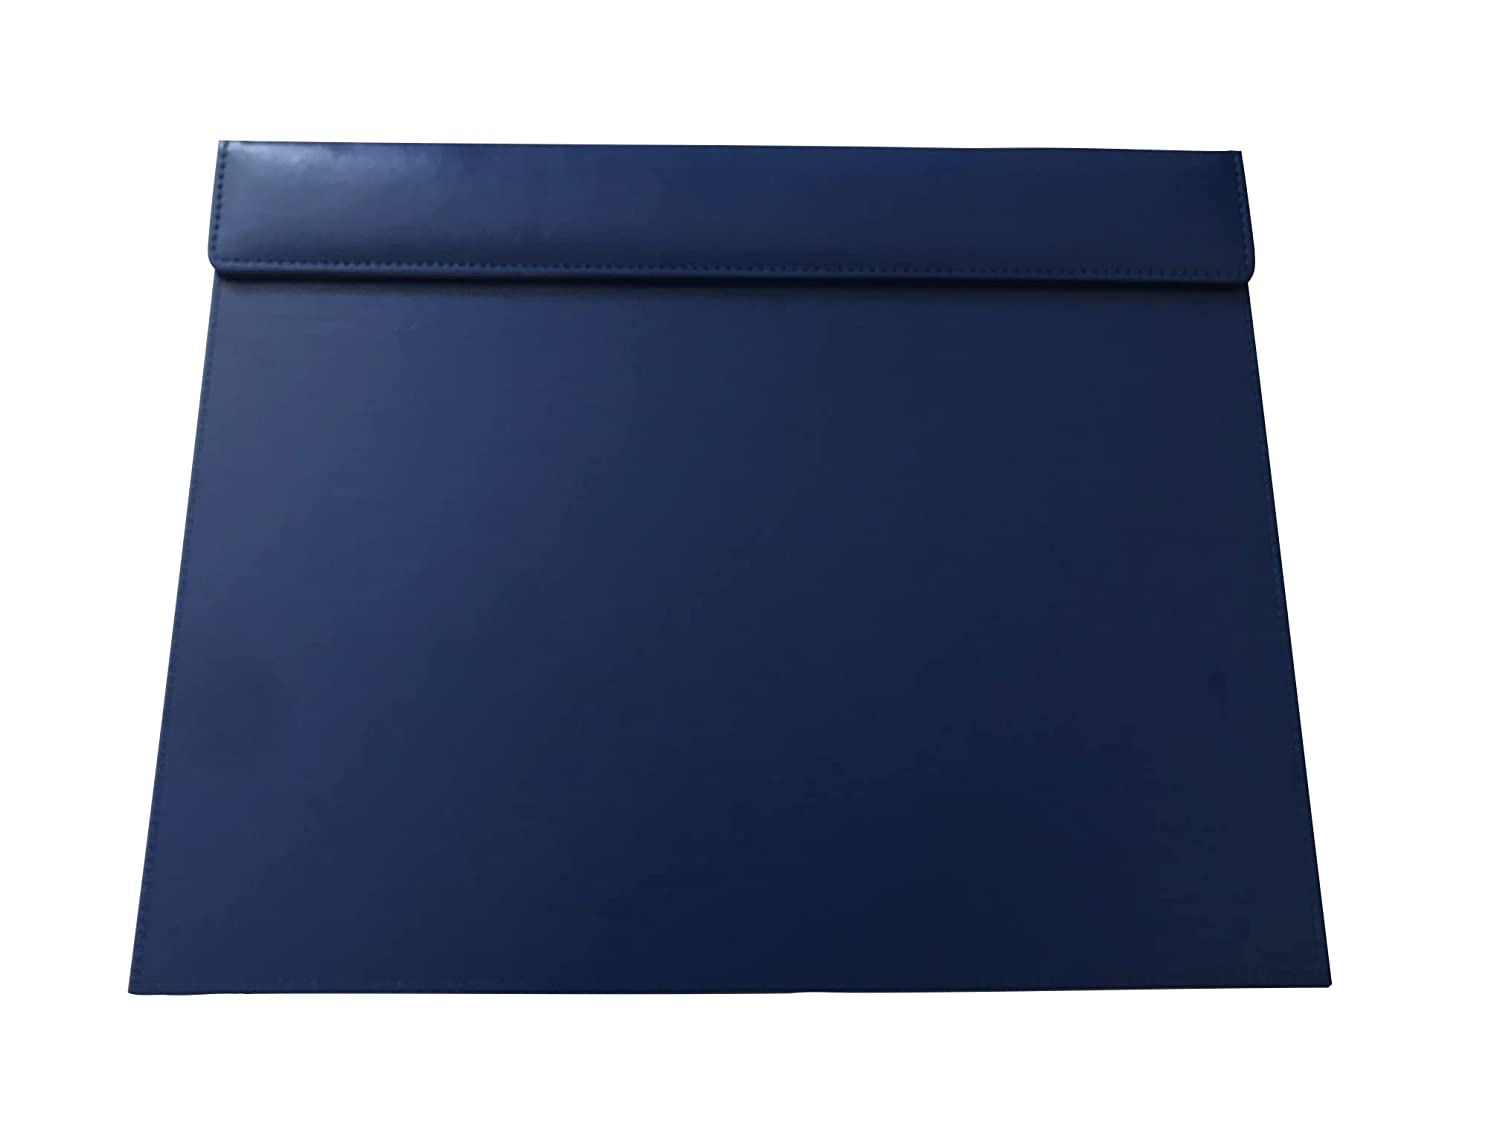 NJ Large Rectangle A3 Desk Writing Pad & Drawing Board Writing Pad Tablet with Magnetic Paper Clip for Hotel Front Desk, Planner, Reception Desk, Blotter: 18x14 : Blue